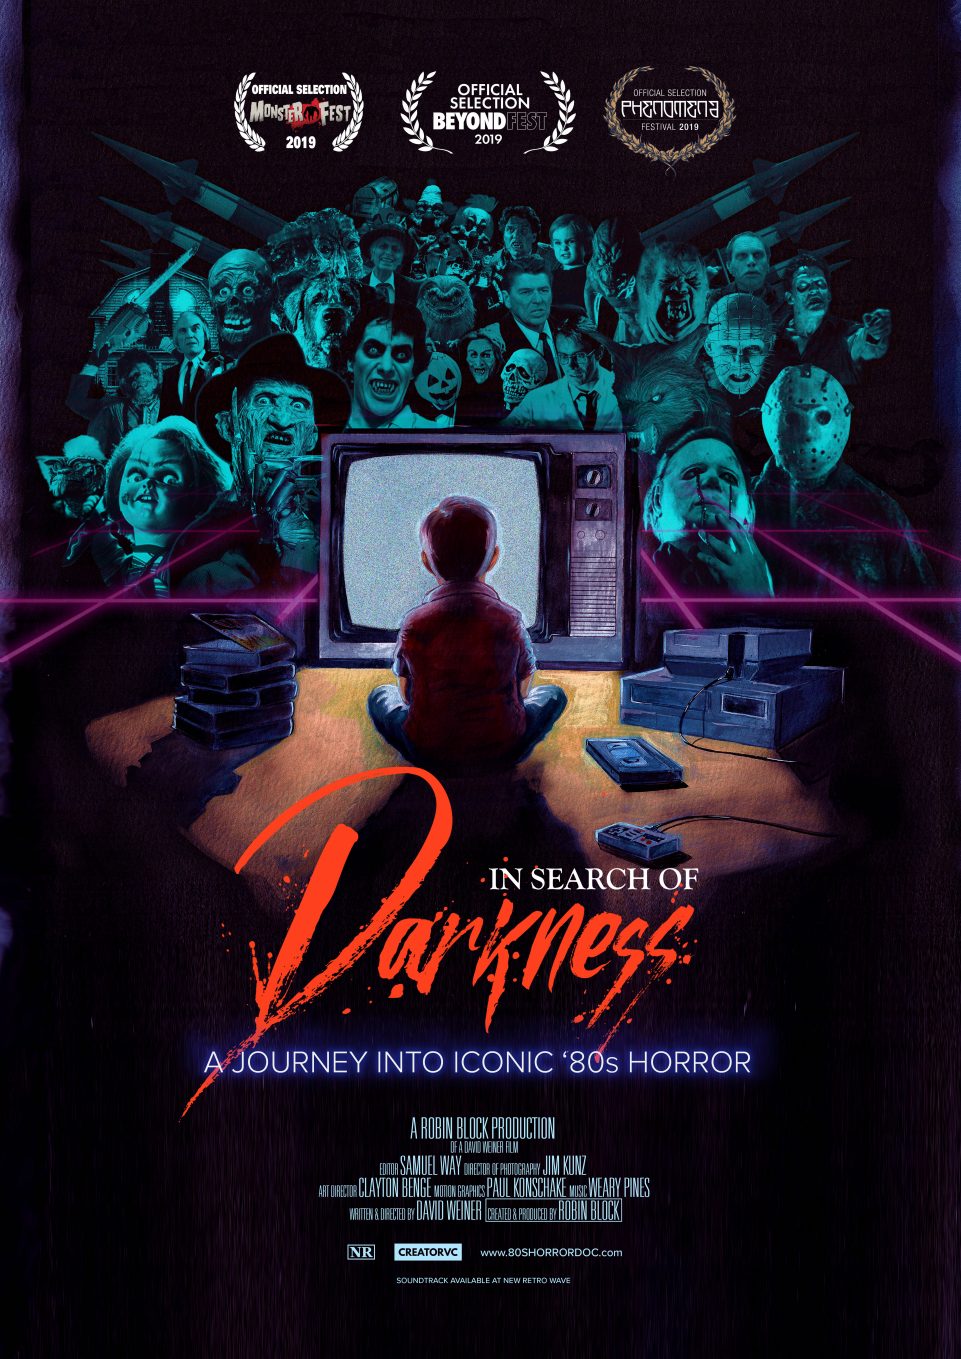 [News] IN SEARCH OF DARKNESS Documentary Blu-Ray & DVD Available to Pre-Order